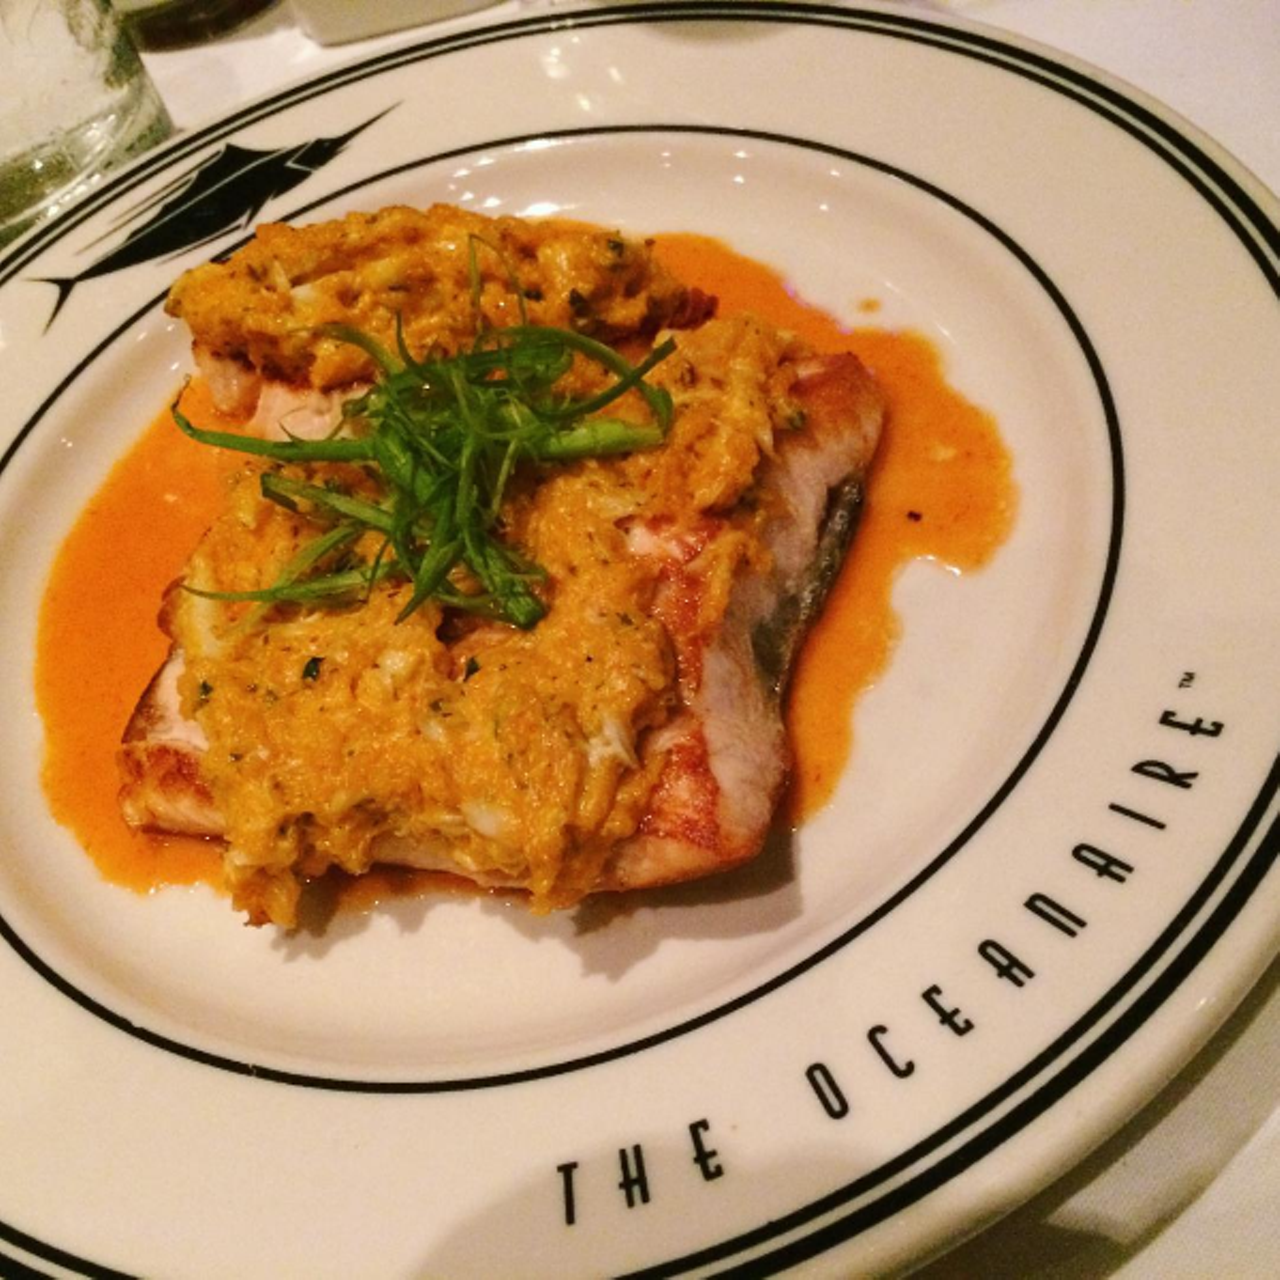  Pan-Seared Florida Mahi &#147;Dynamite&#148; at Oceanaire Seafood Room
Step back in time at this sleek seafood temple for a spicy lobster and crab-crusted slab of local mahi mahi served with, what else, &#147;rooster&#148; sauce. 
9101 International Drive, 407-363-4801
Photo via laceymatherne/Instagram